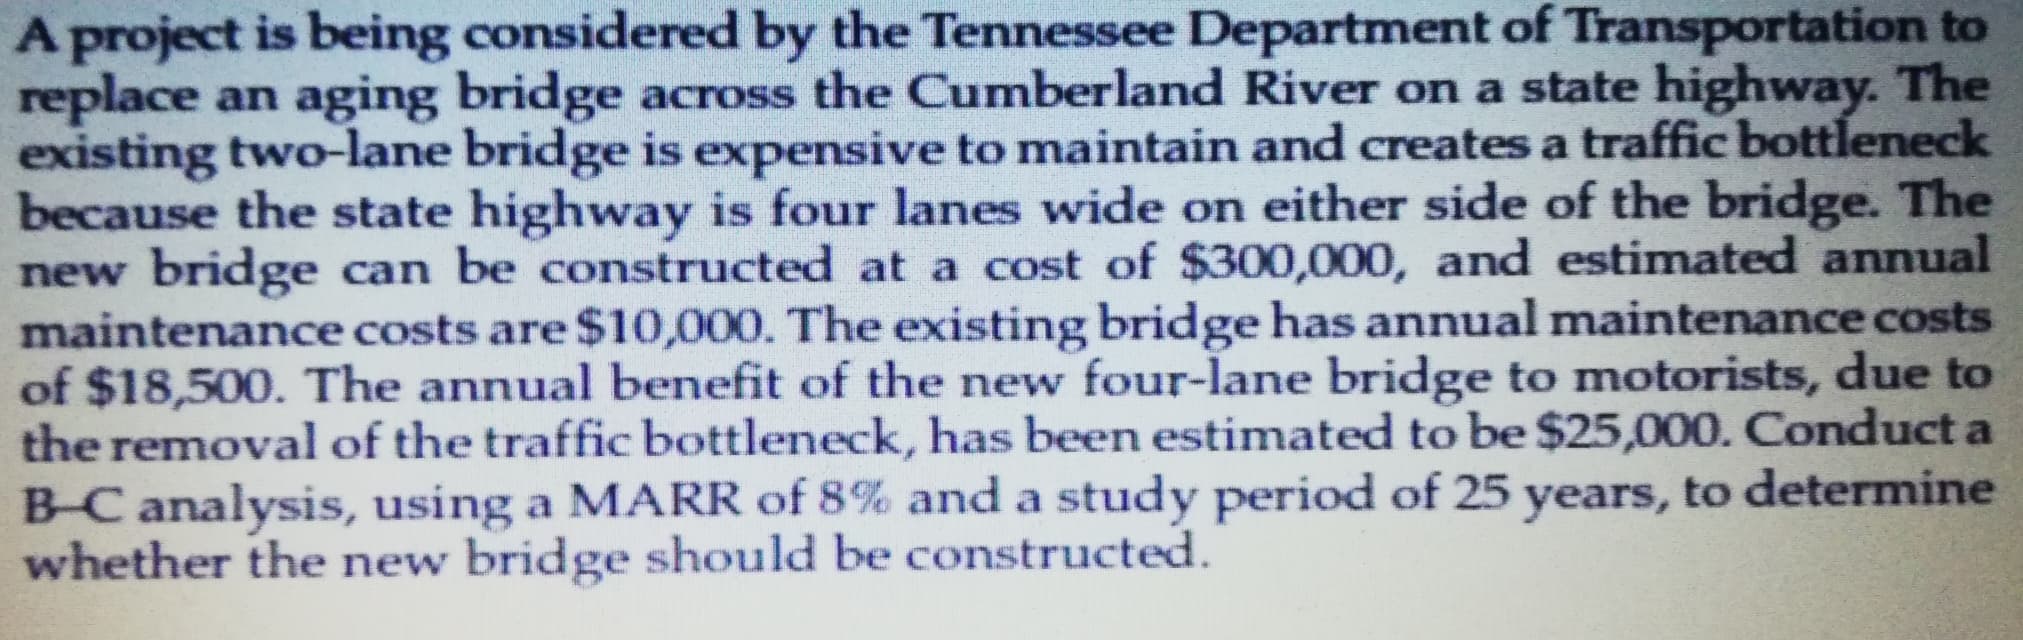 A project is being considered by the Tennessee Department of Transportation to
replace an aging bridge across the Cumberland River on a state highway. The
existing two-lane bridge is expensive to maintain and creates a traffic bottleneck
because the state highway is four lanes wide on either side of the bridge. The
new bridge can be constructed at a cost of $300,000, and estimated annual
maintenance costs are $10,000. The existing bridge has annual maintenance costs
of $18,500. The annual benefit of the new four-lane bridge to motorists, due to
the removal of the traffic bottleneck, has been estimated to be $25,000. Conduct a
B-C analysis, using a MARR of 8% and a study period of 25 years, to determine
whether the new bridge should be constructed.
